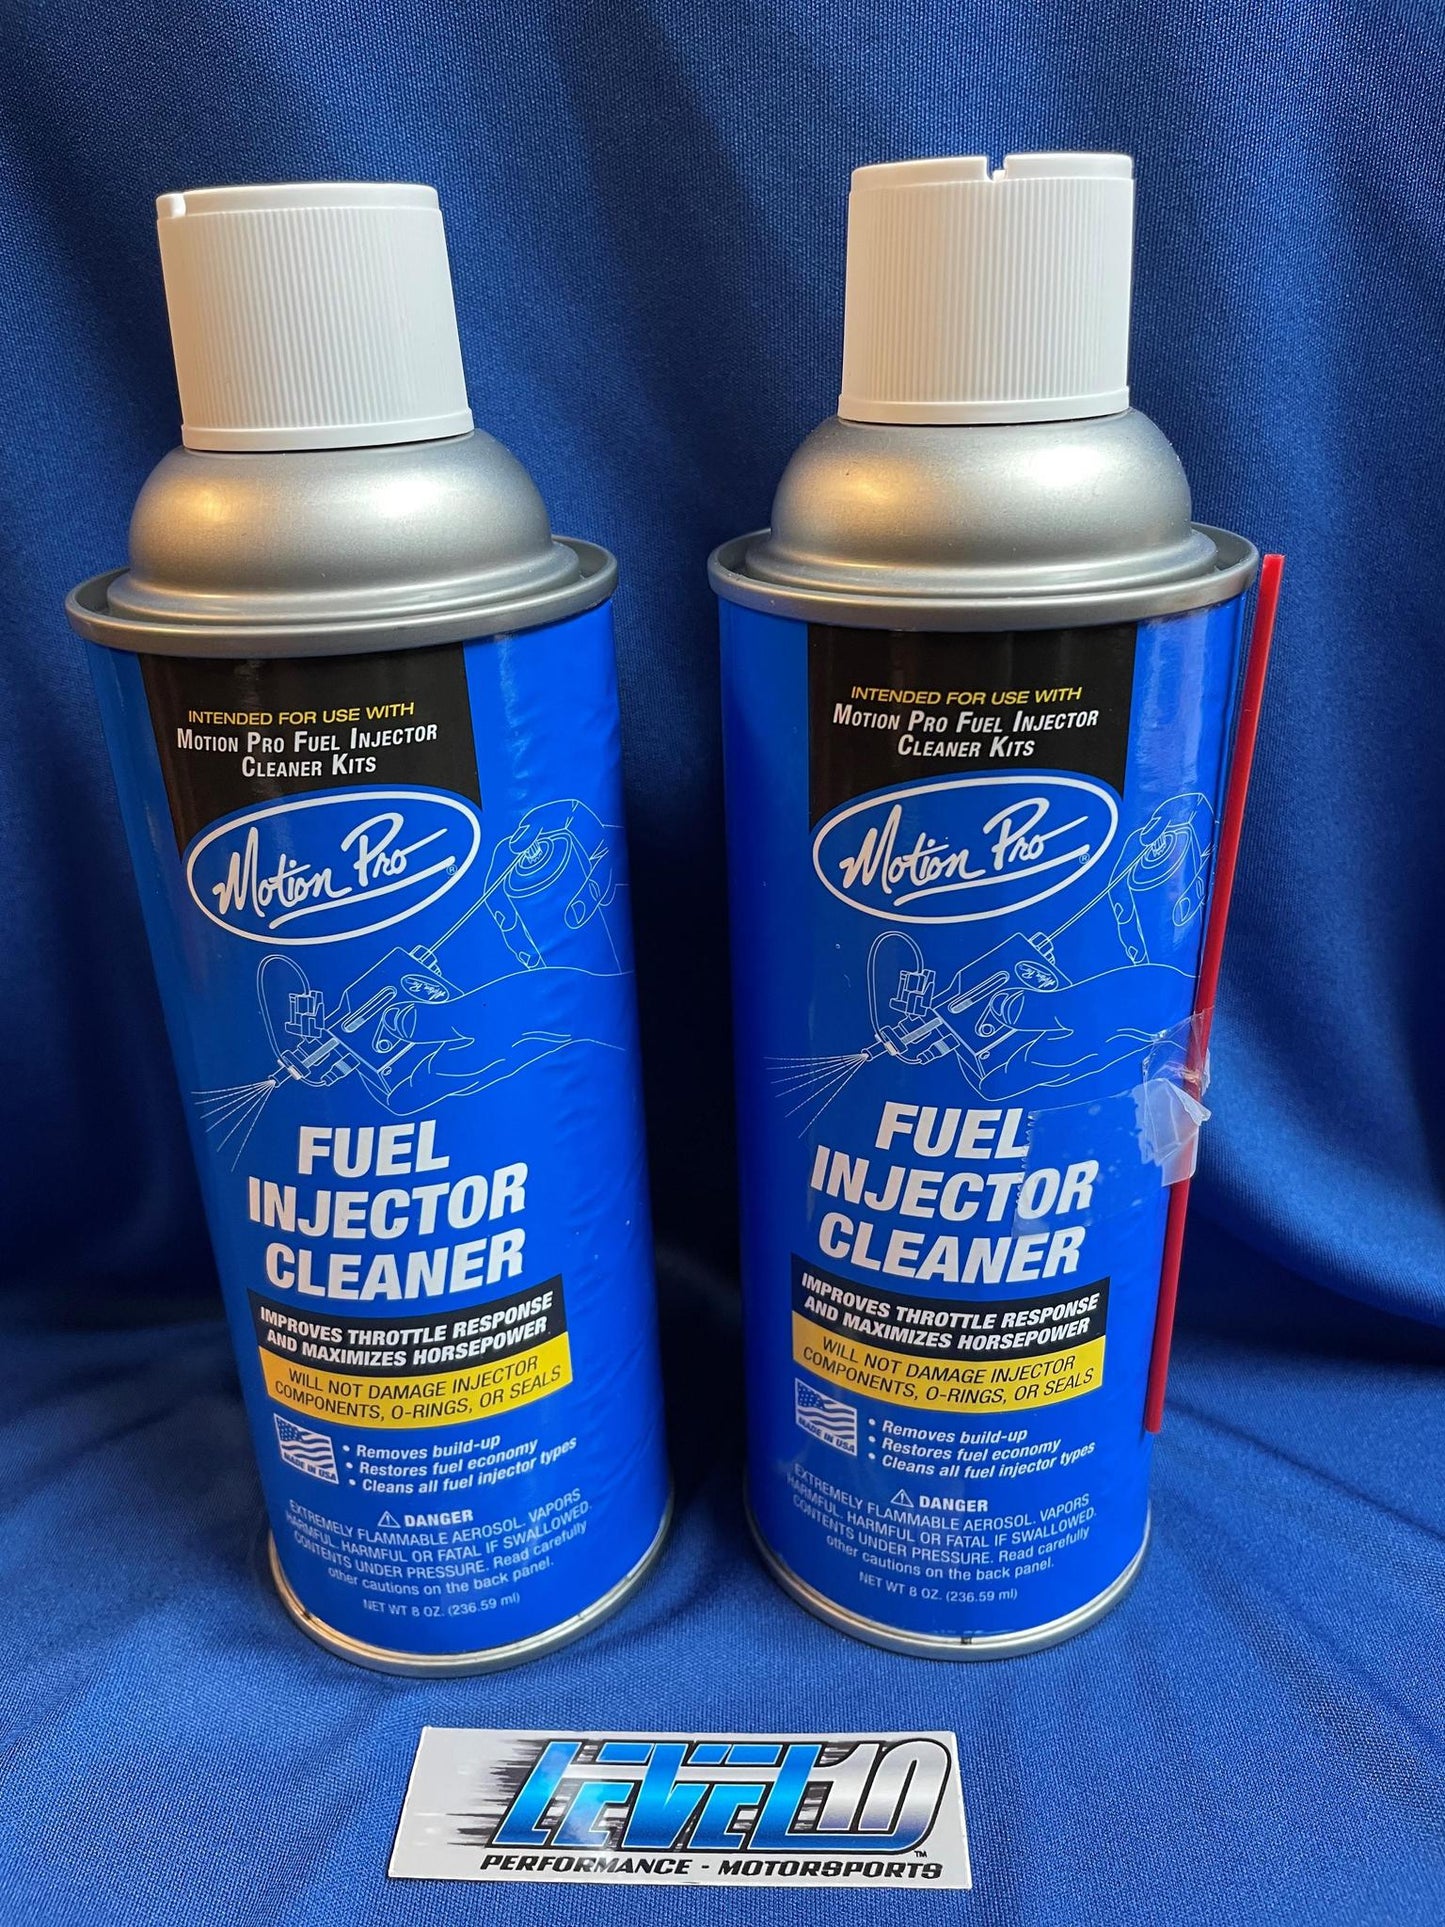 Motion Pro Fuel Injector Cleaner 8oz spray 15-0004 (TWIN PACK)